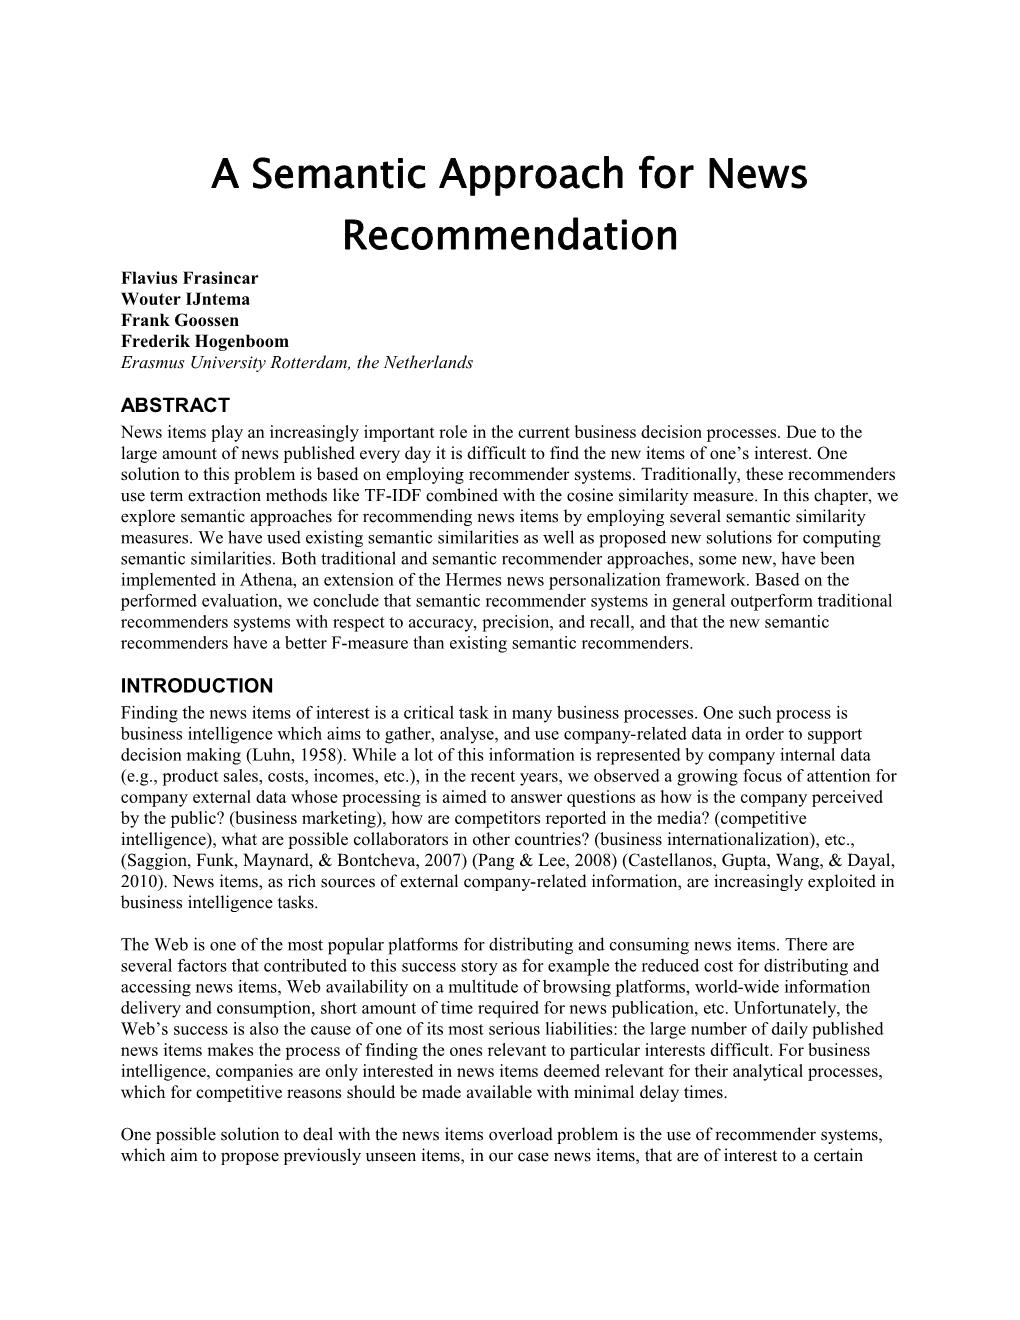 A Semantic Approach for News Recommendation